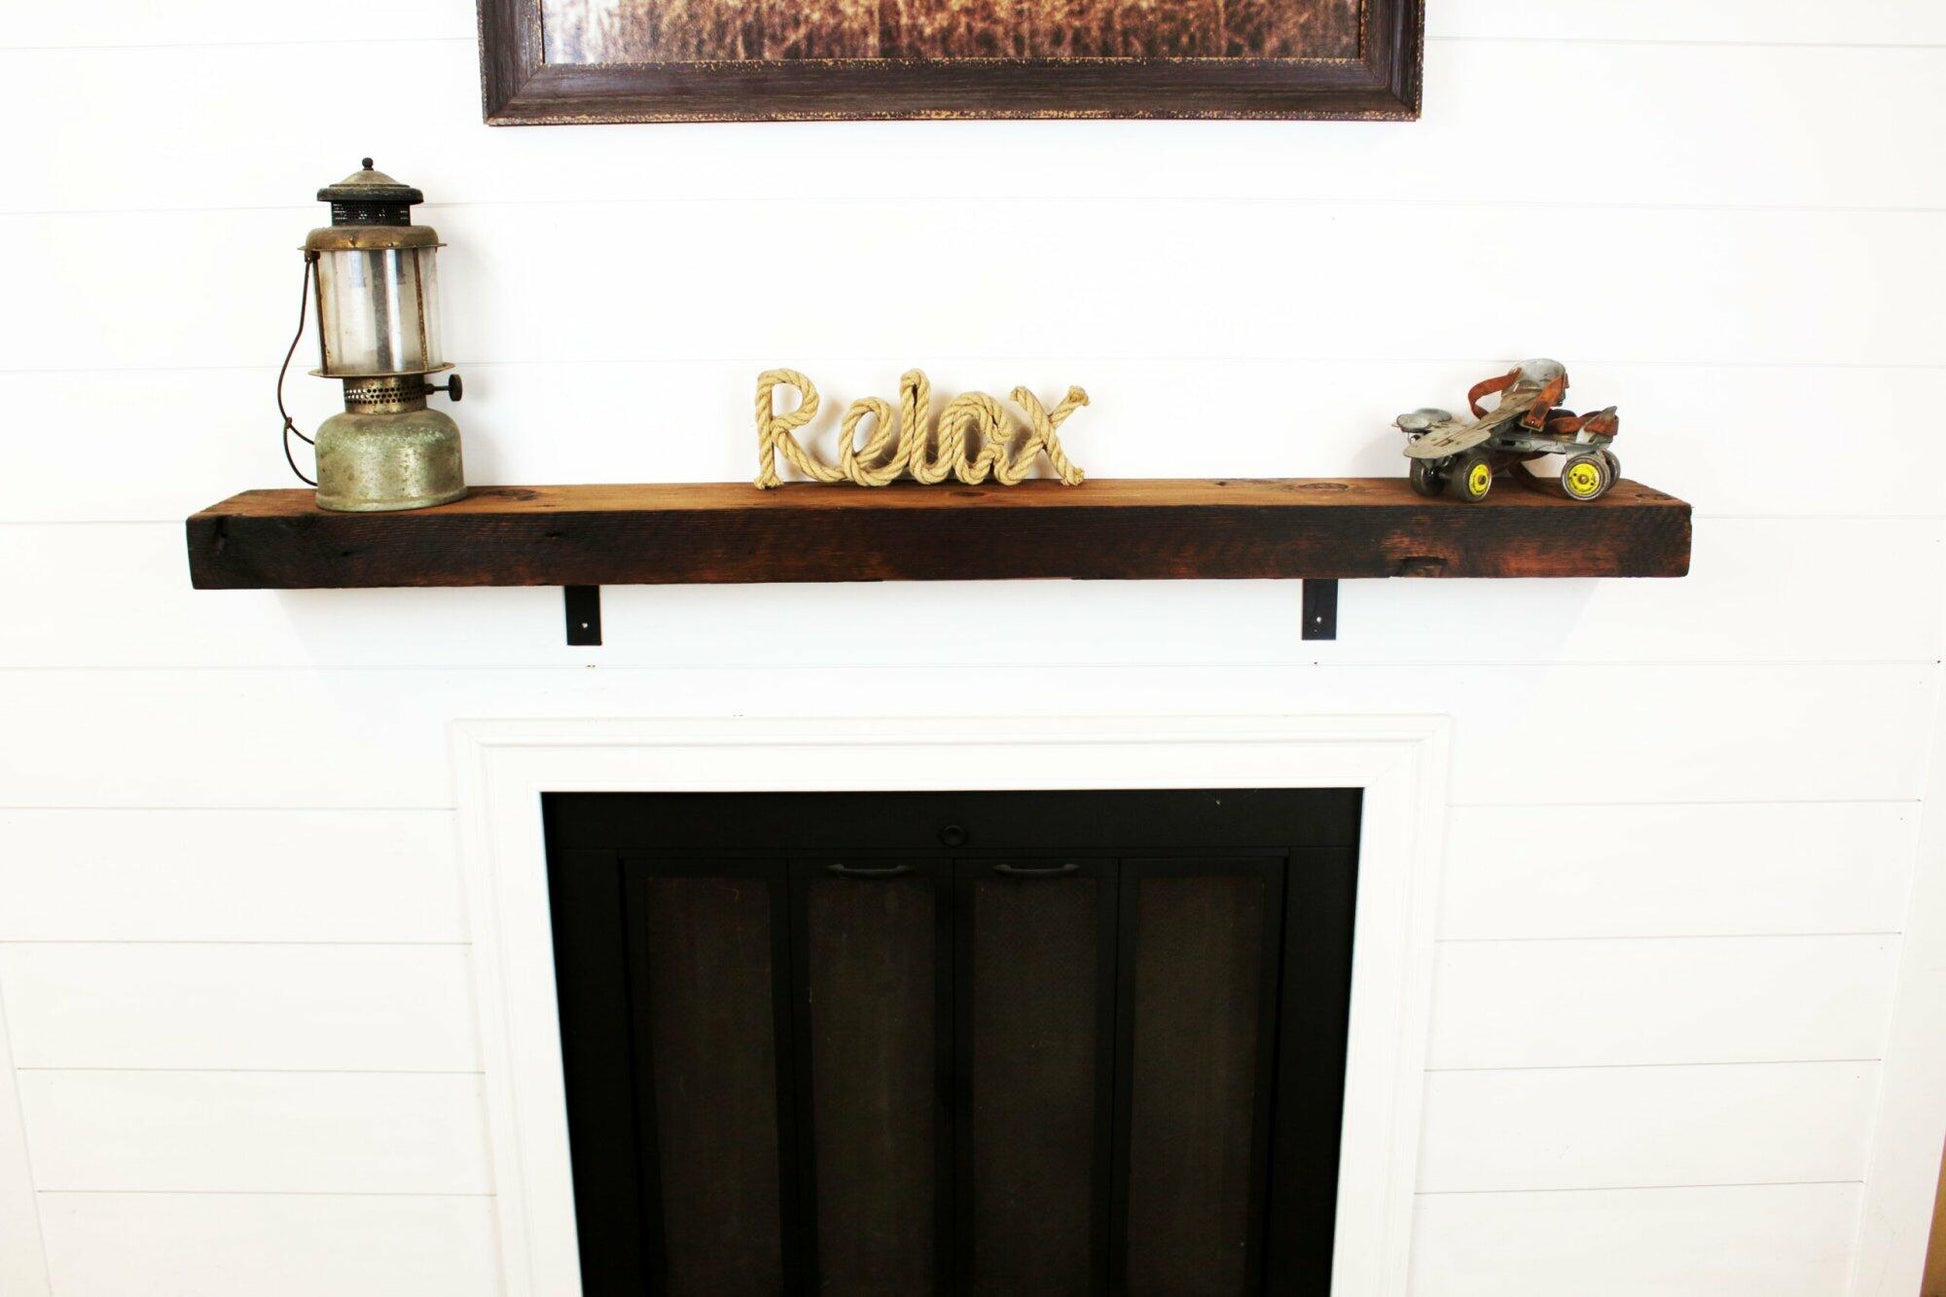 skip-planed reclaimed barnwood fireplace mantel. Front face is darker than top side of mantel.